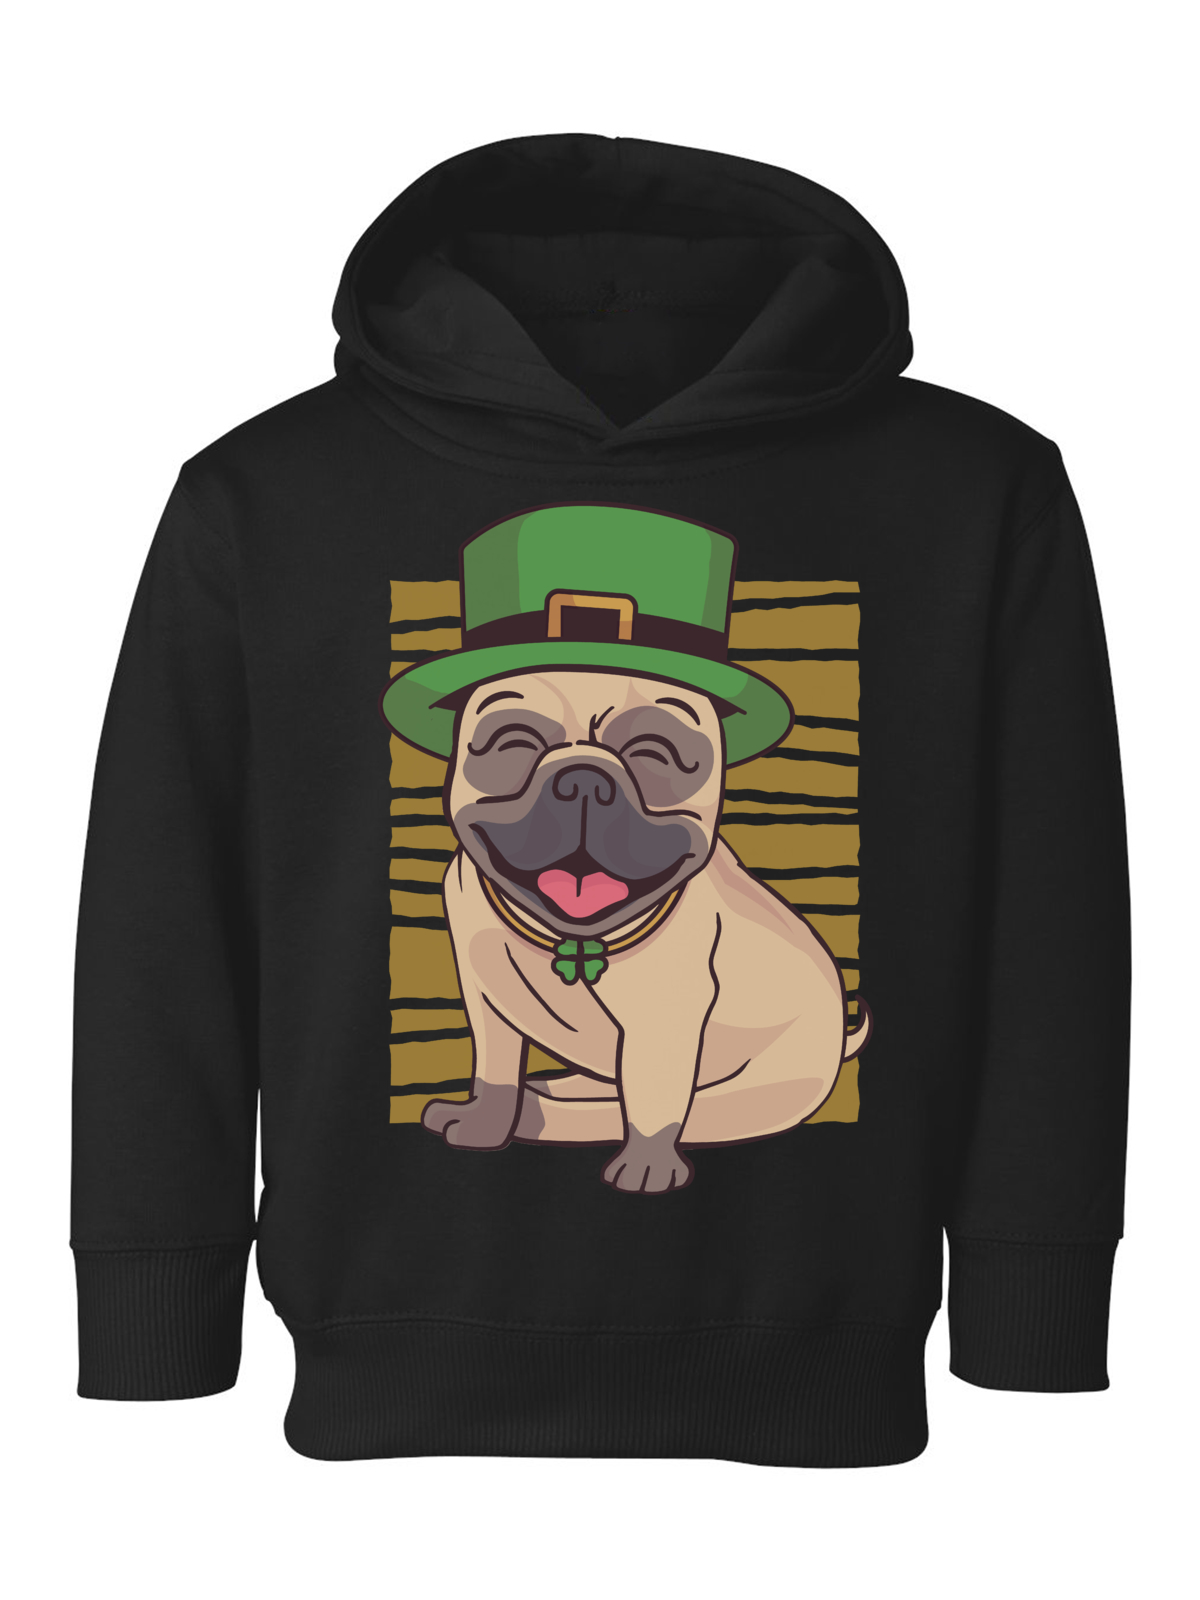 Awkward Styles Irish Day Toddler Hoodie Pug in Green Hat Hooded Sweatshirt for Kids Patrick's Day - image 1 of 4